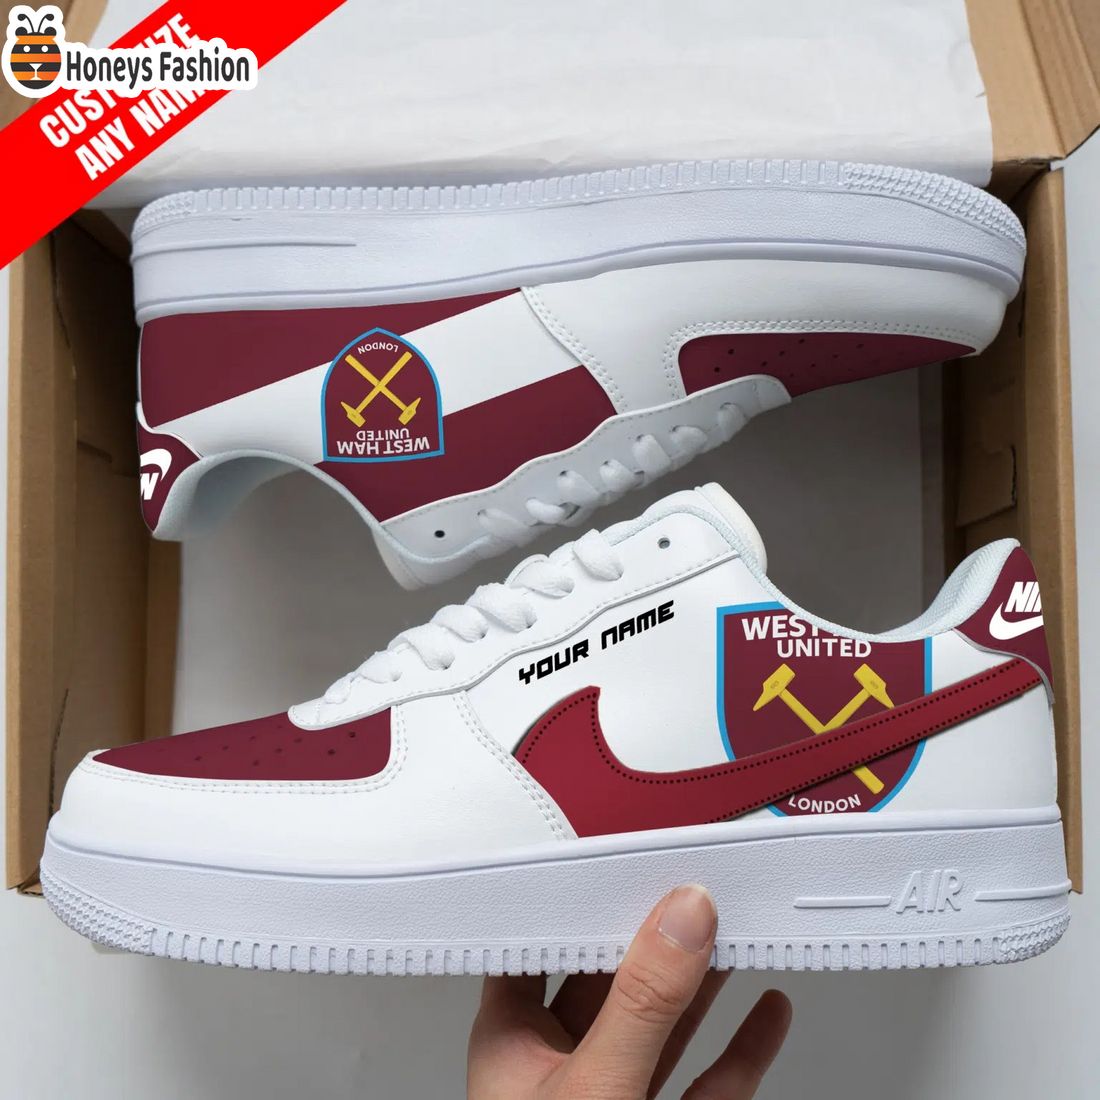 West Ham United Personalized Nike Air Force Sneakers